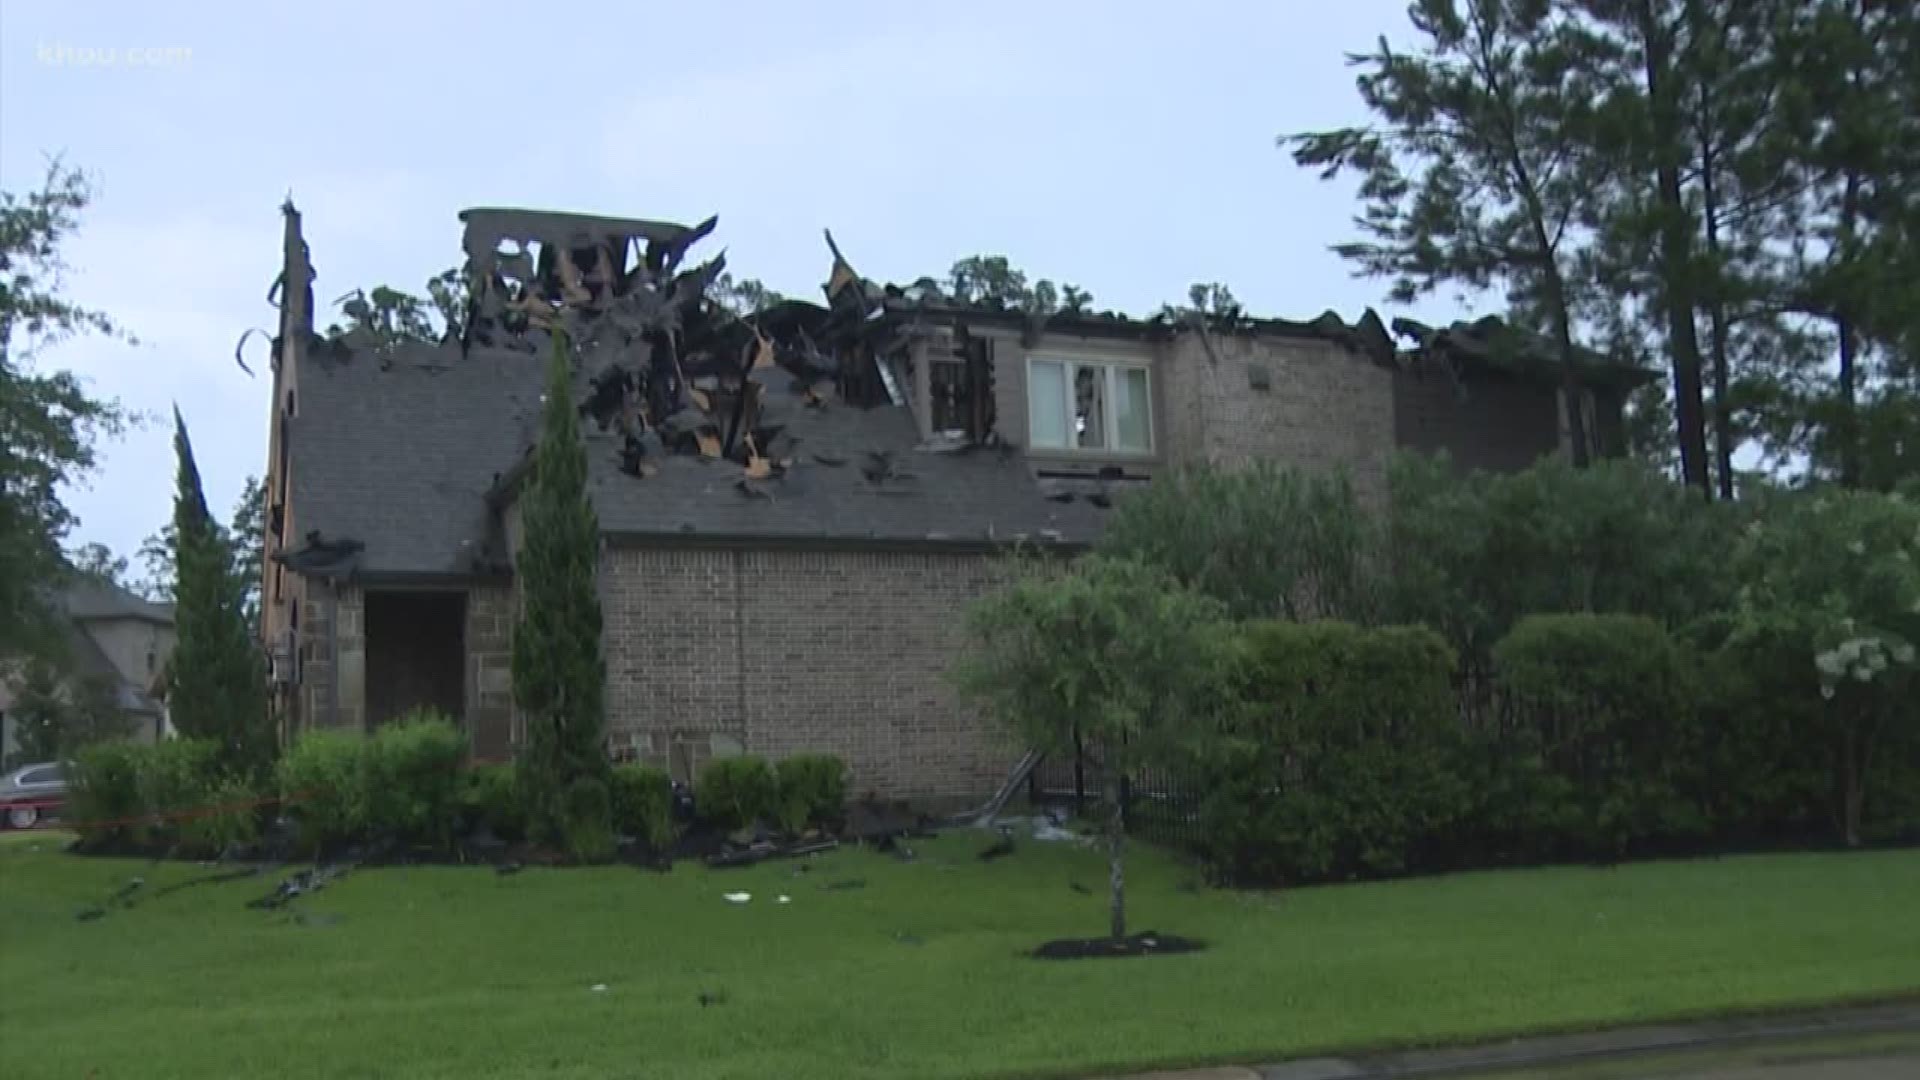 During the early morning storms on Monday, a lightning strike caused a house fire near The Woodlands.